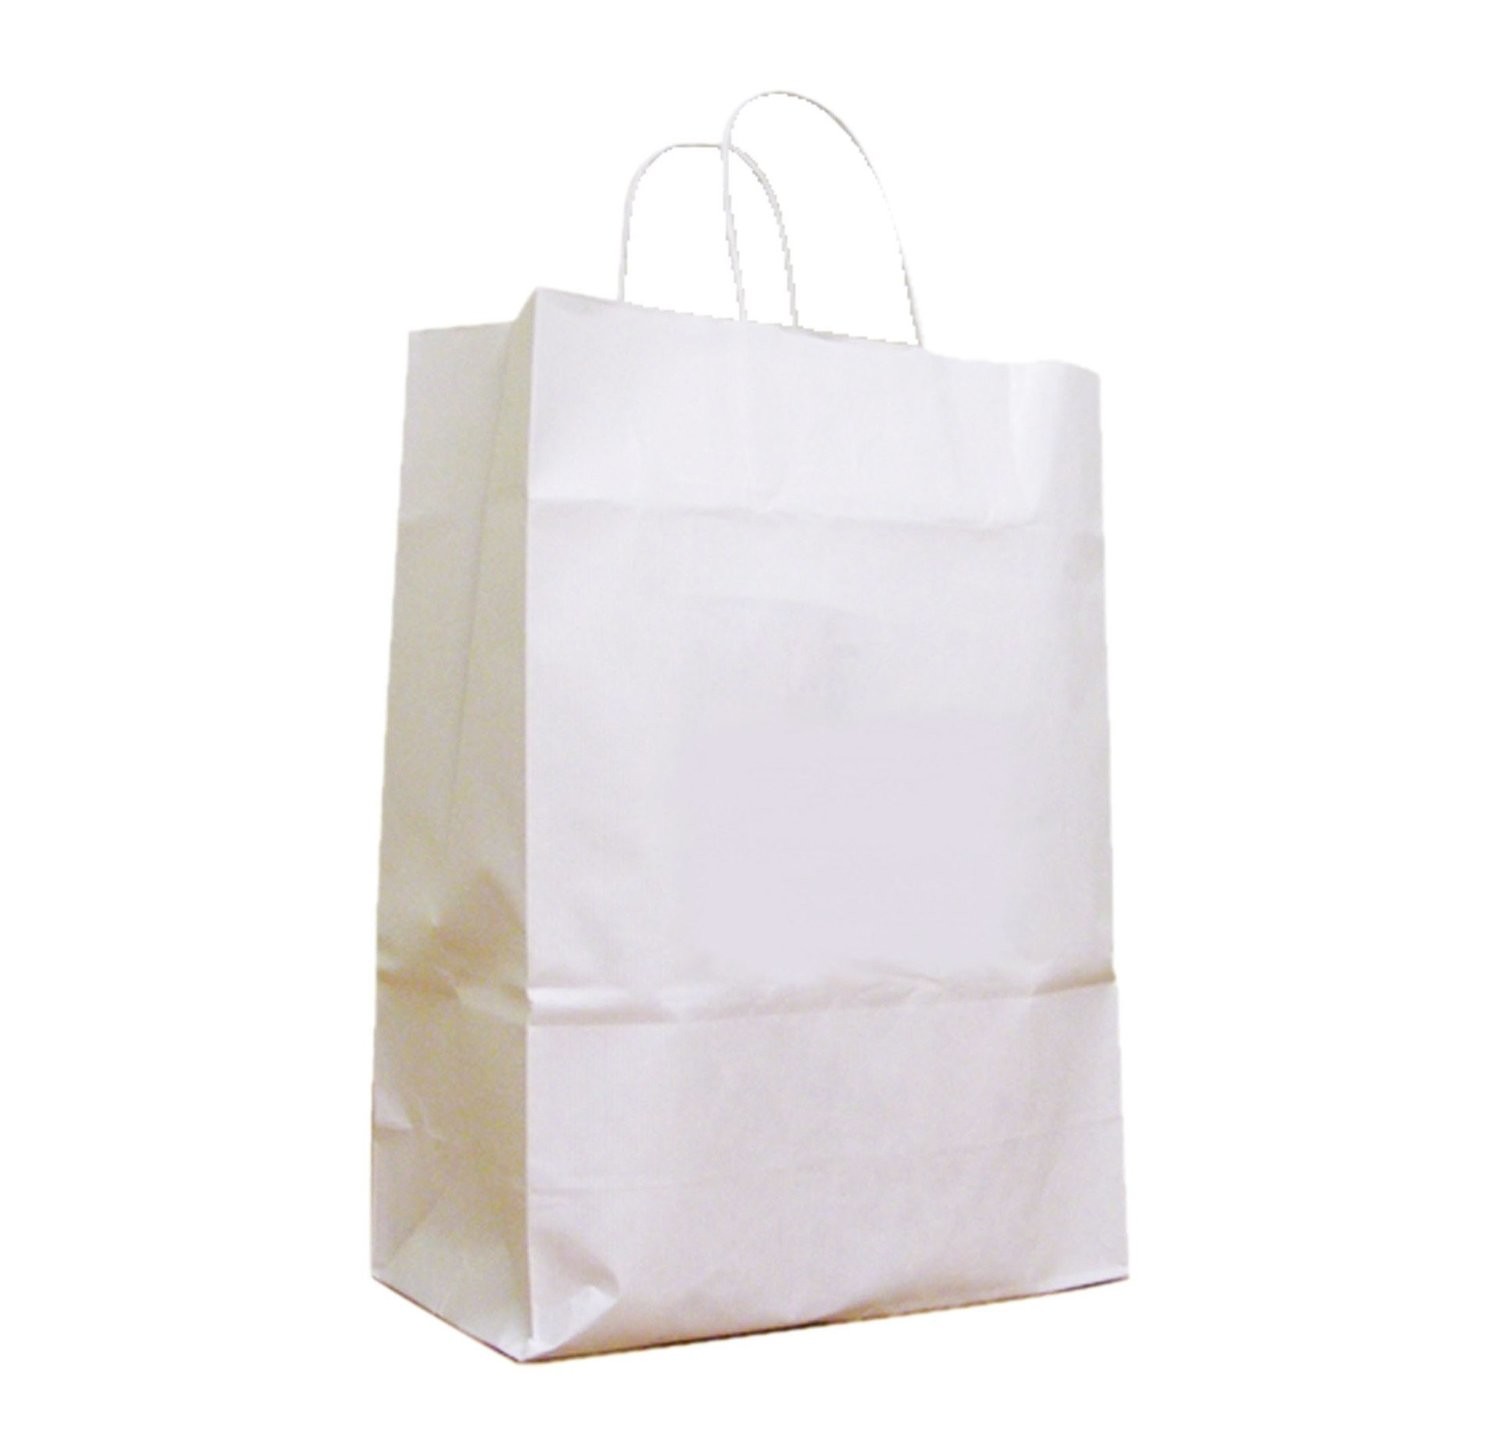 Twist Handle Paper Bags Brown or White 305 x 425 x 400mm